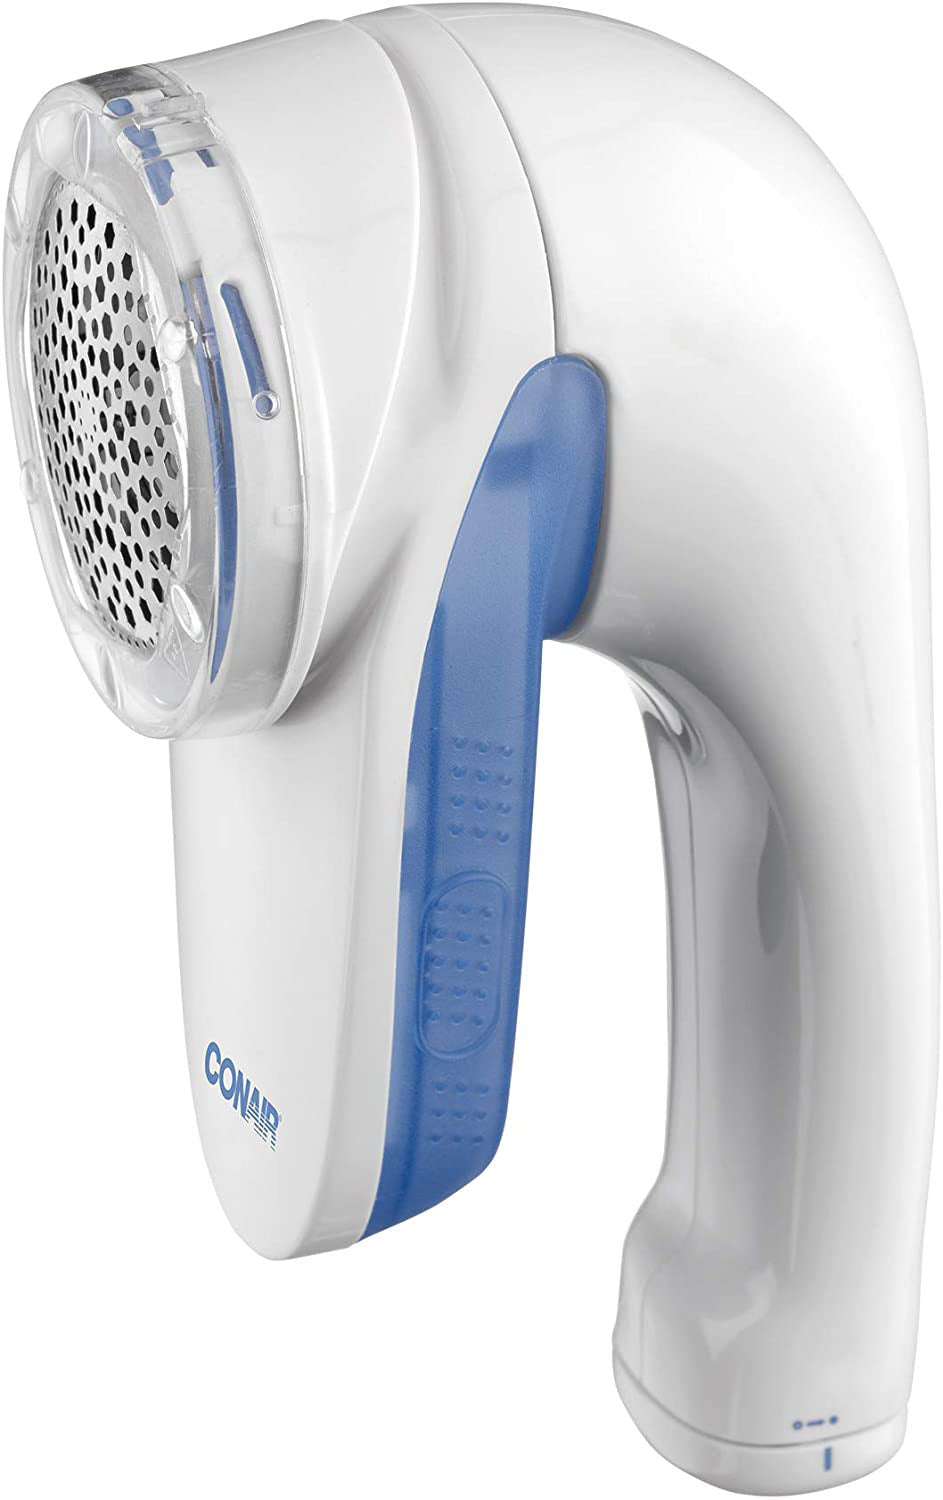 Conair Battery-Operated Fabric Defuzzer